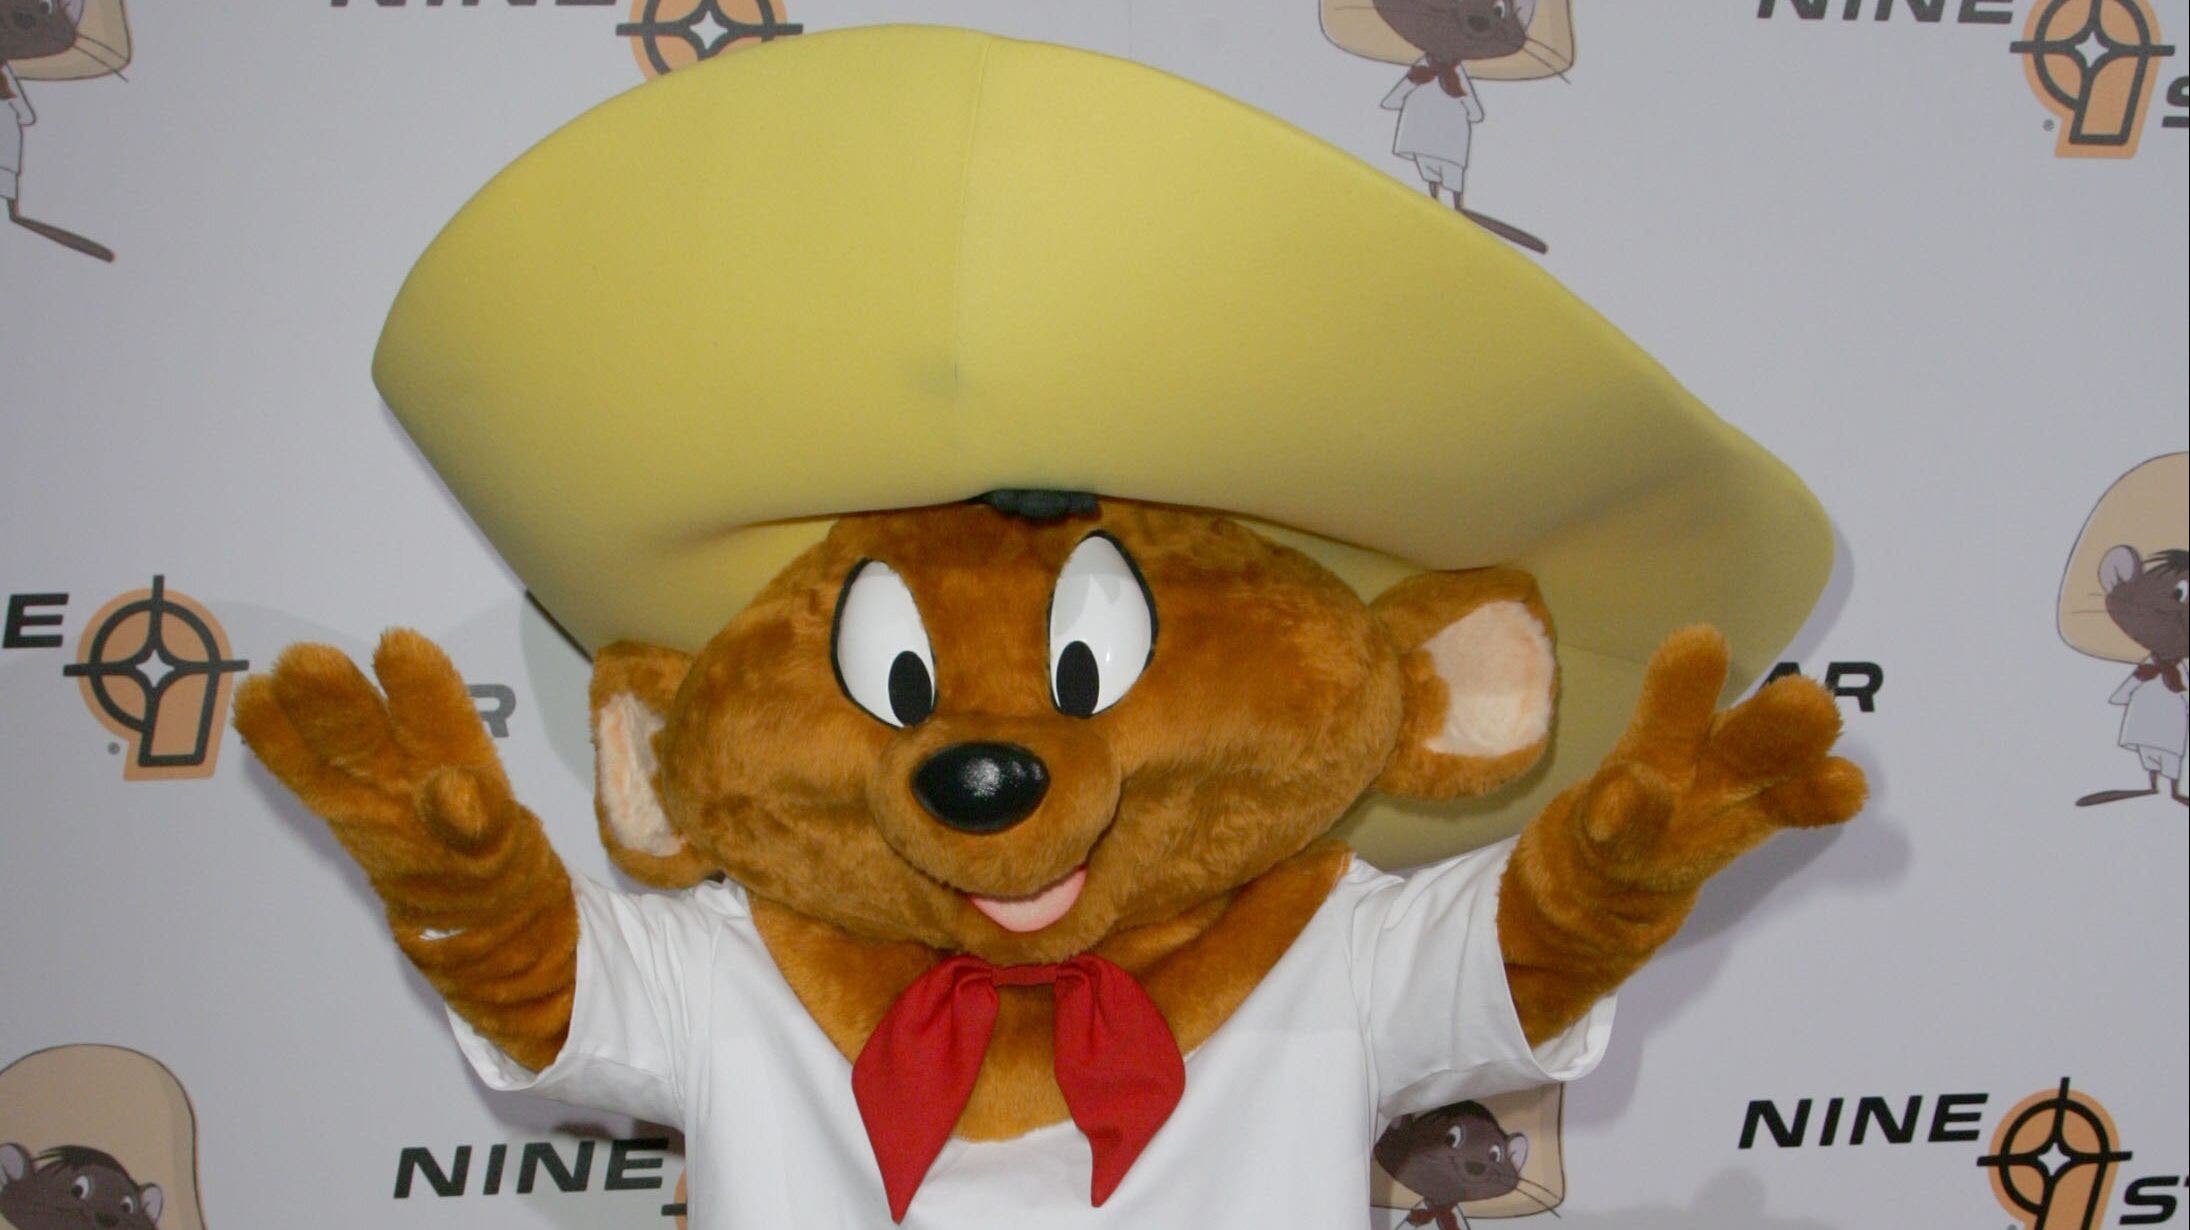 Speedy Gonzales defends after NY Times columnist ‘corrosive stereotype’ explodes